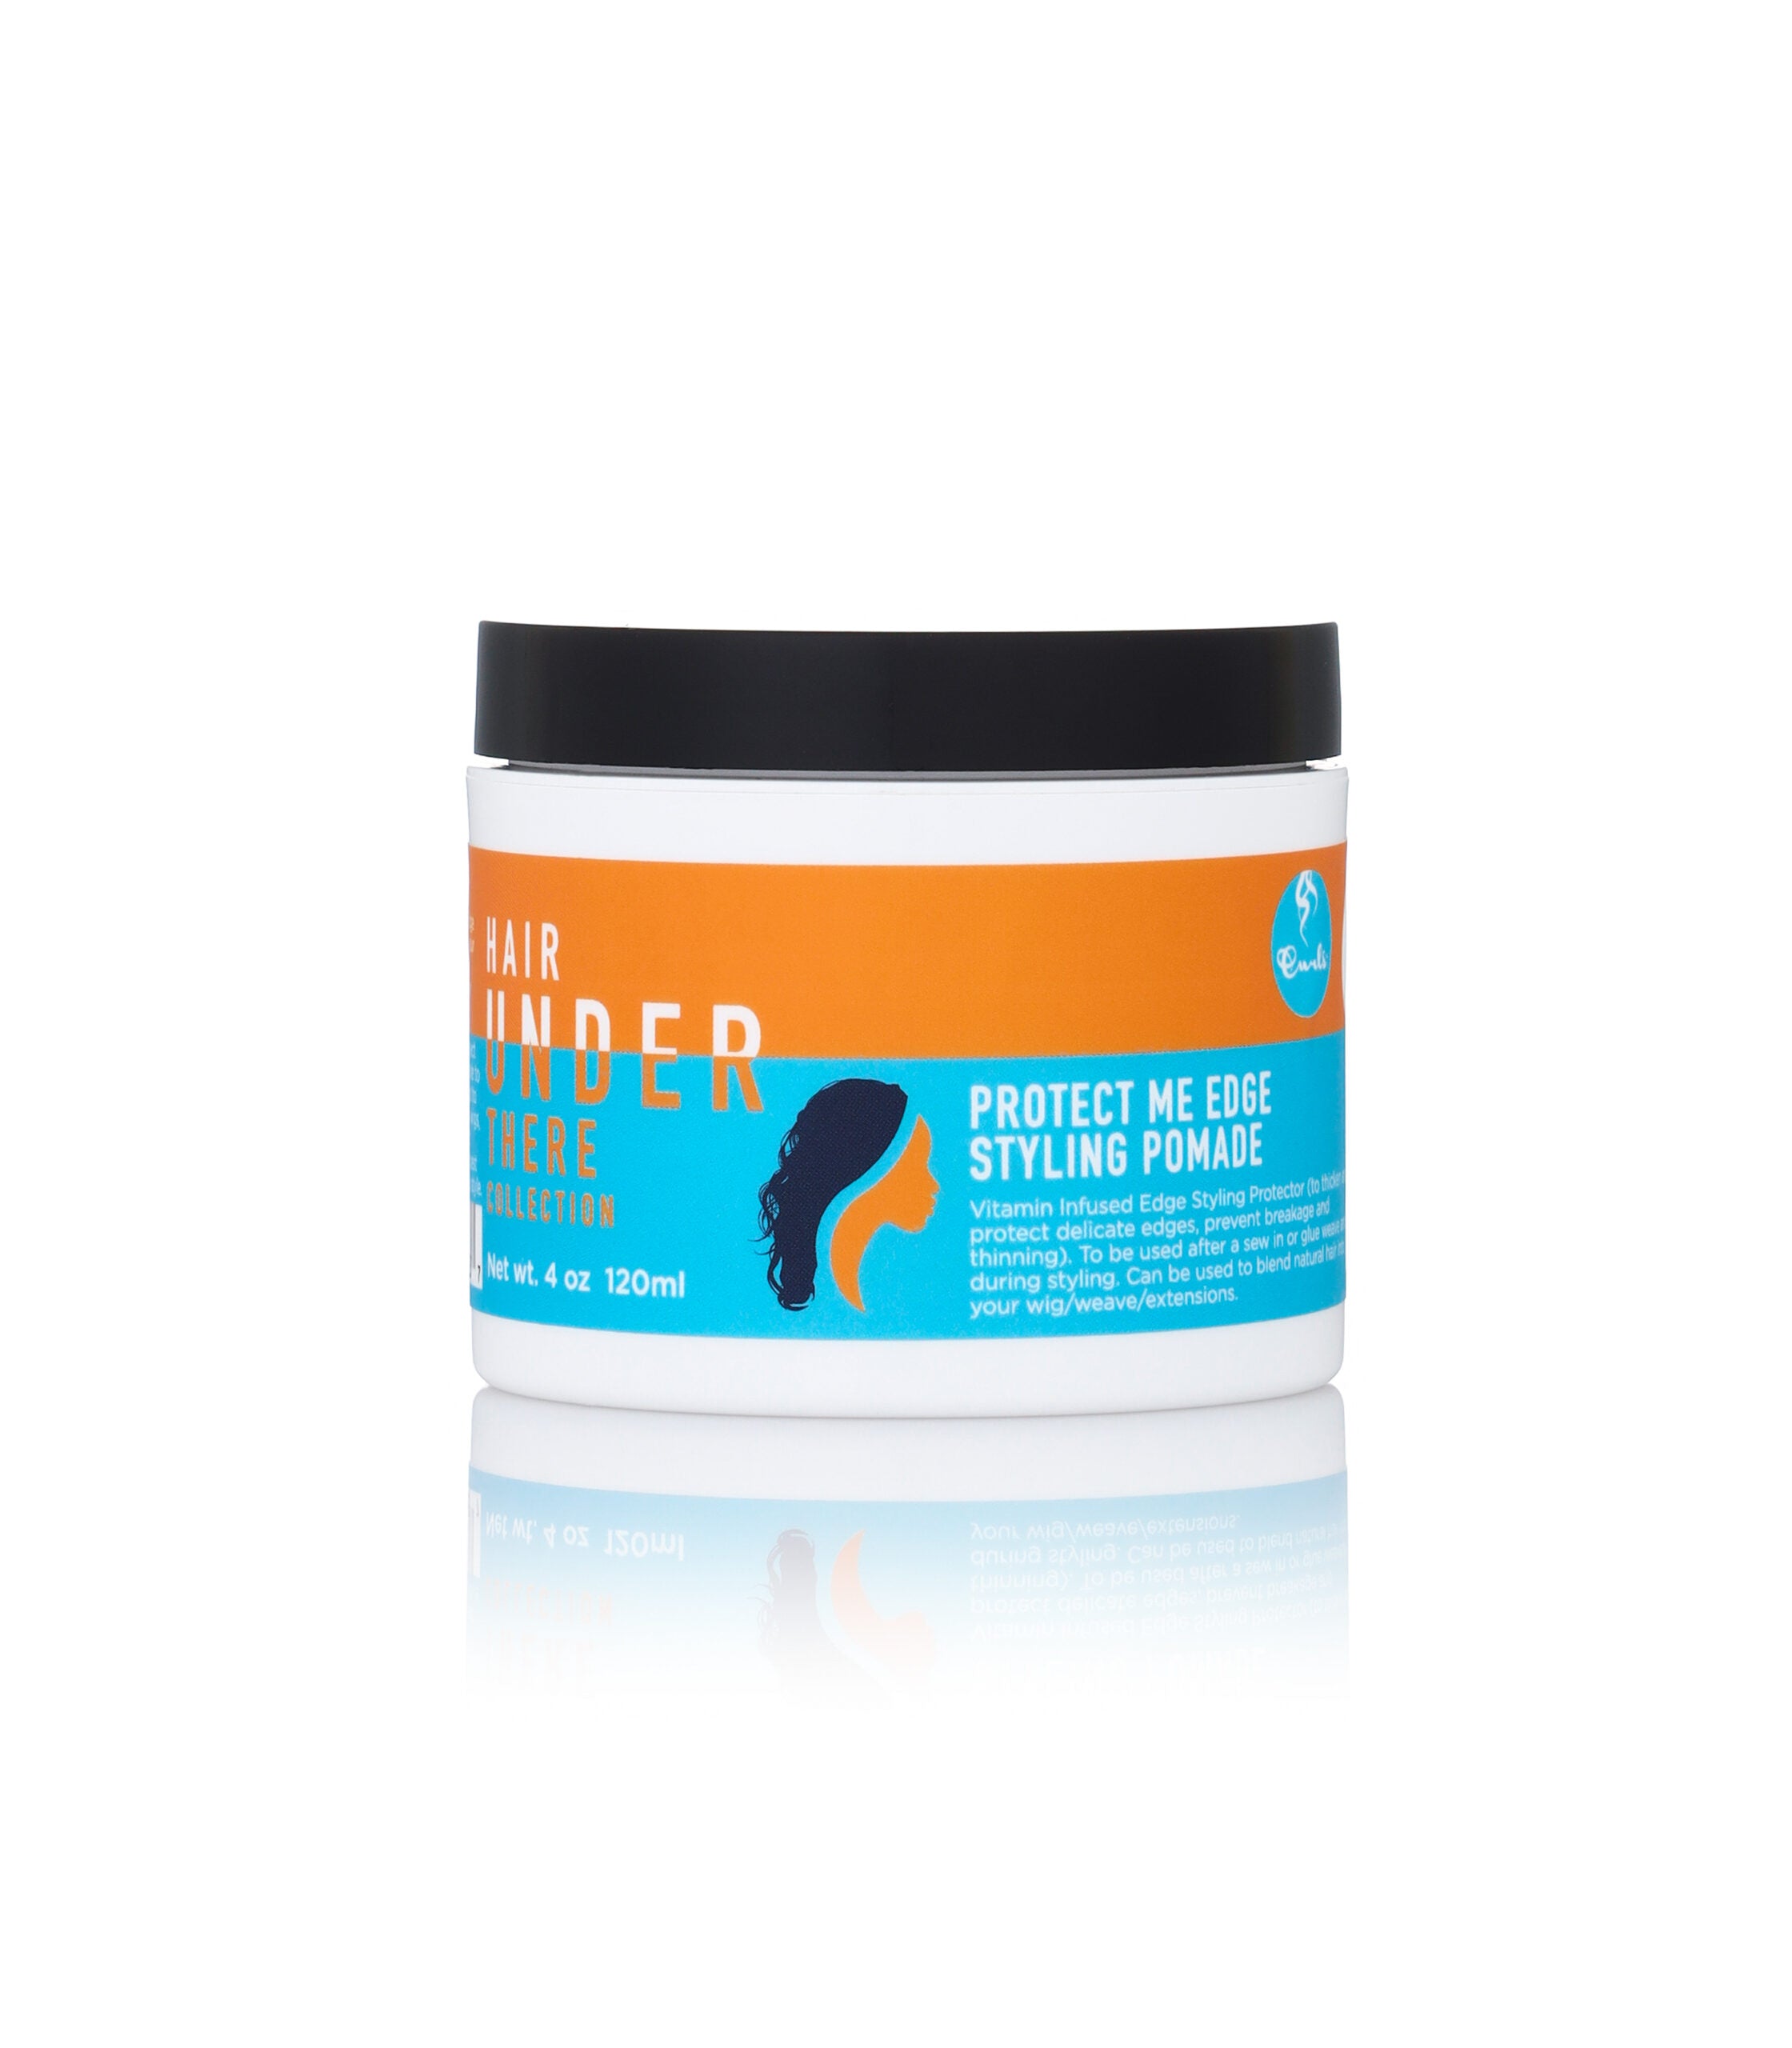 Hair Under There Protect Me Edge Styling Pomade – CURLS